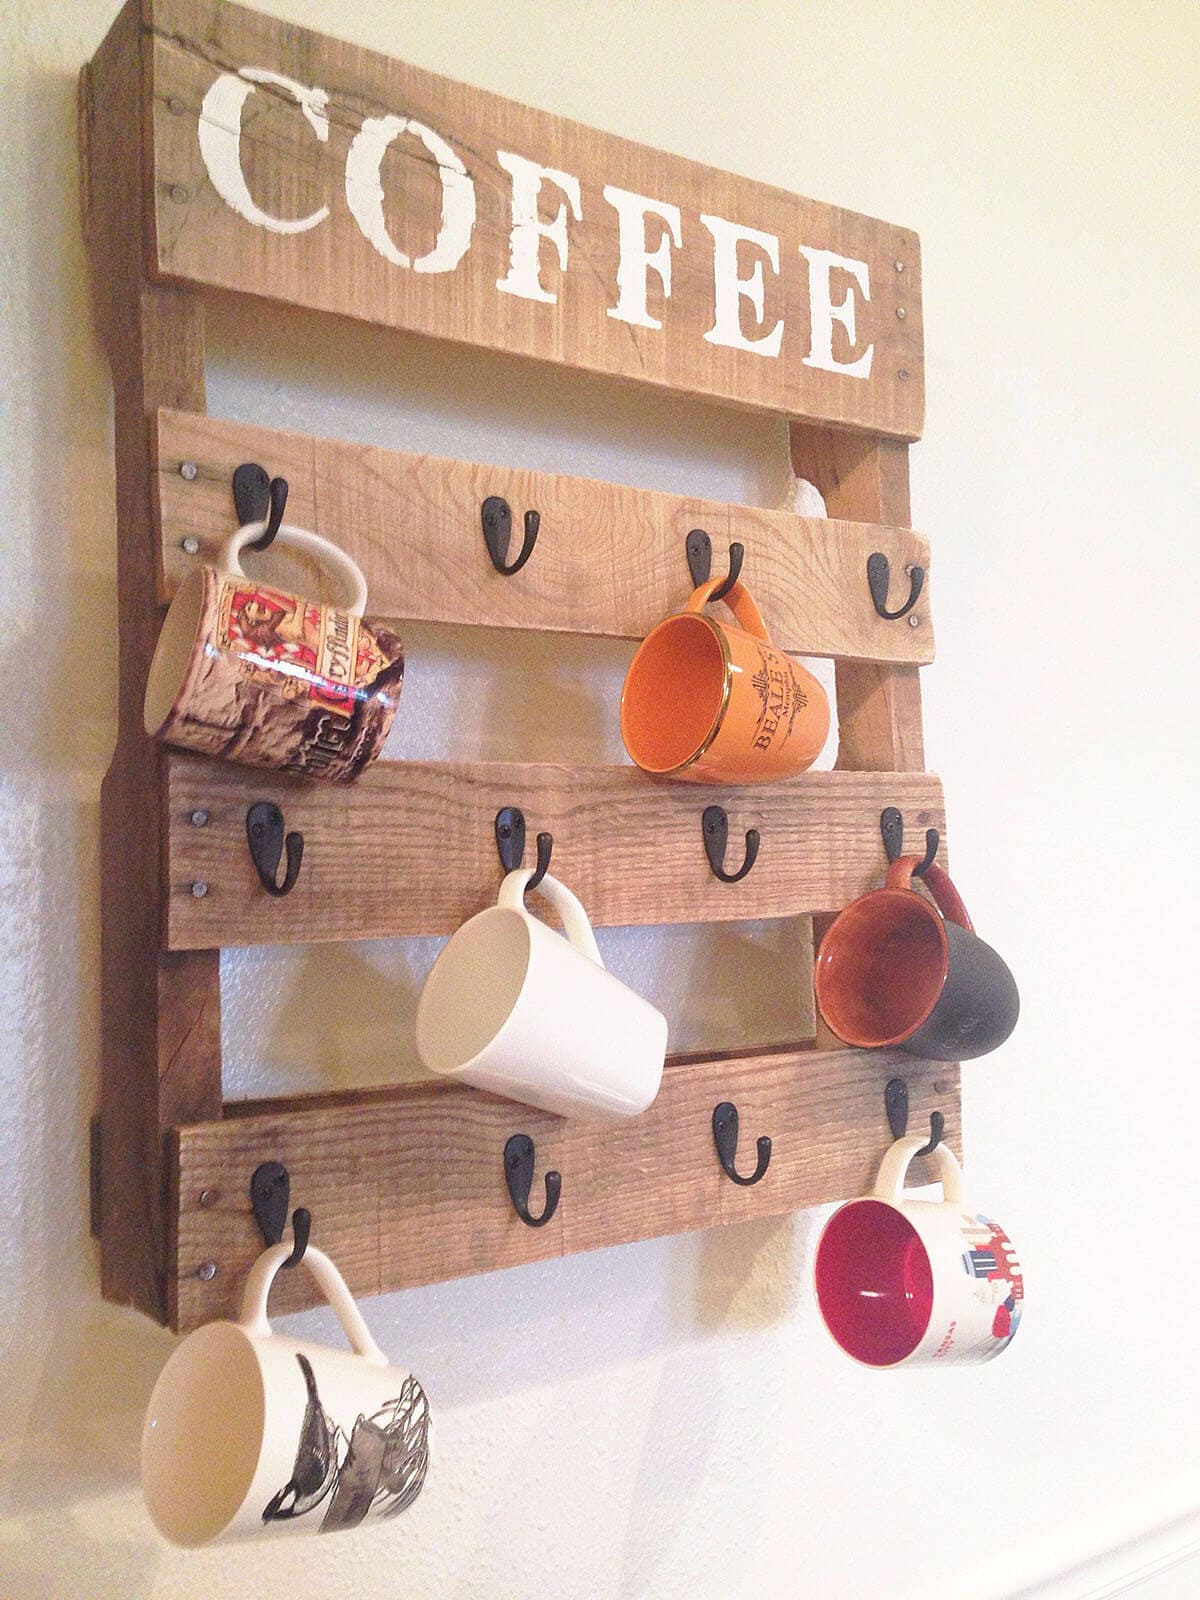 22 coffee cup holder ideas to declutter your kitchen - 73